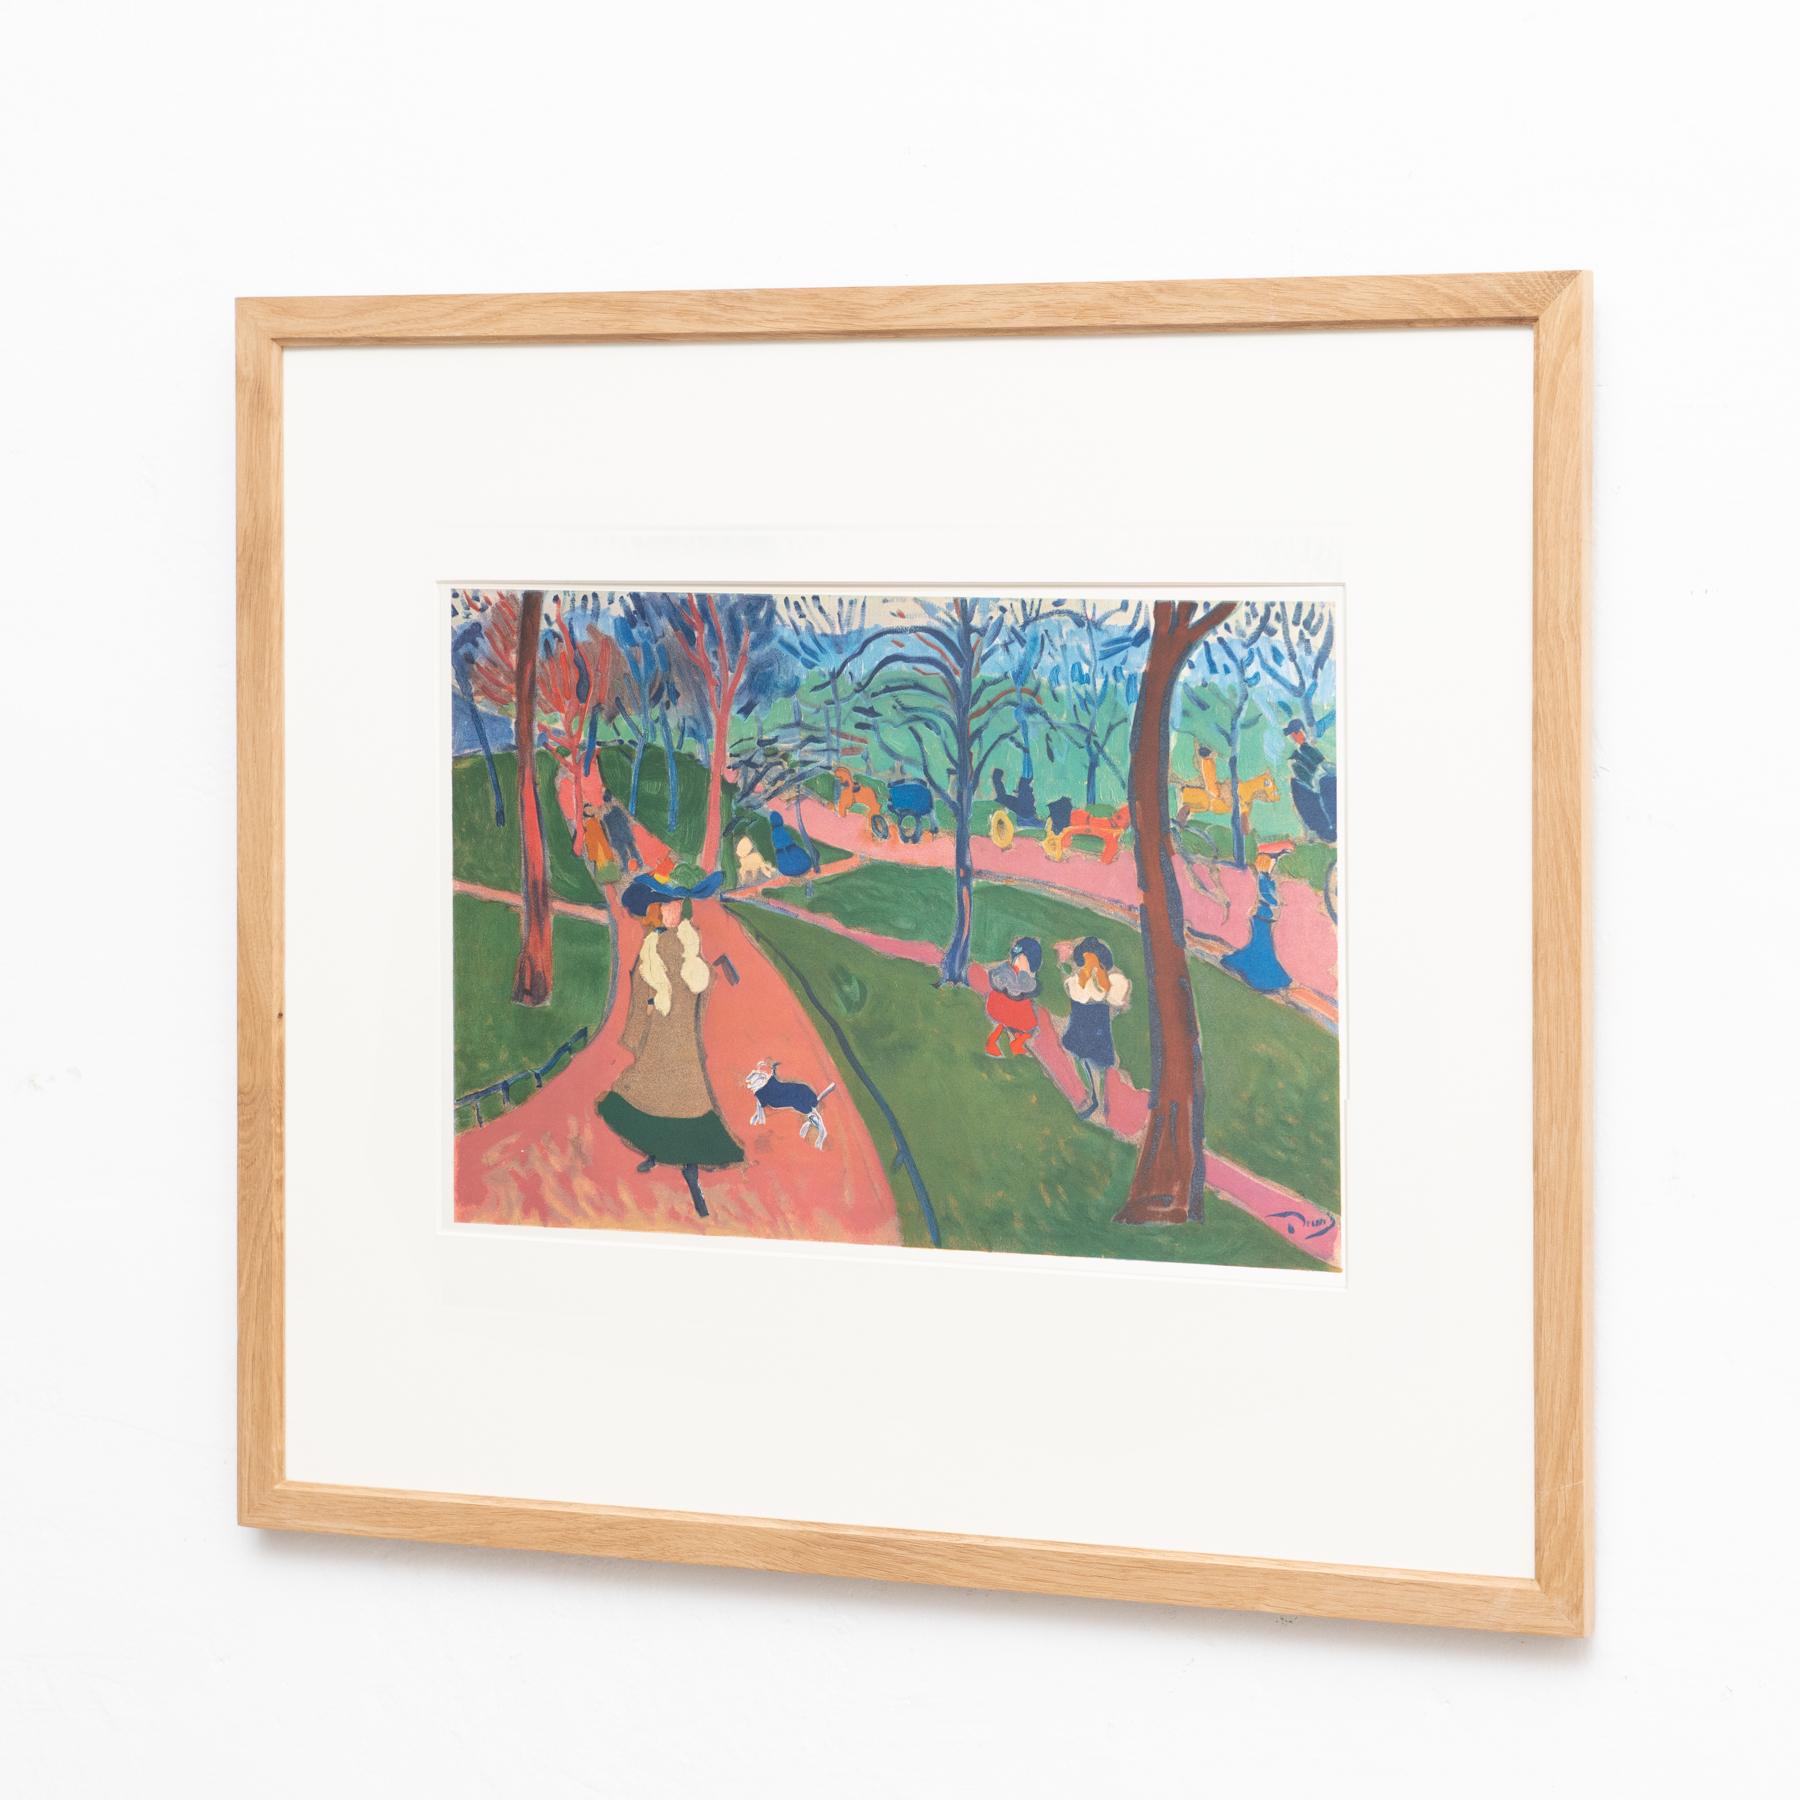 Original 'Hyde Park' color lithograph by André Derain.

Lithograph printed from an original painting made by the author in France, circa 1906.

Published by Fernand Mourlot in Les Fauves. Paris, circa 1972. 

Framed and signed in the